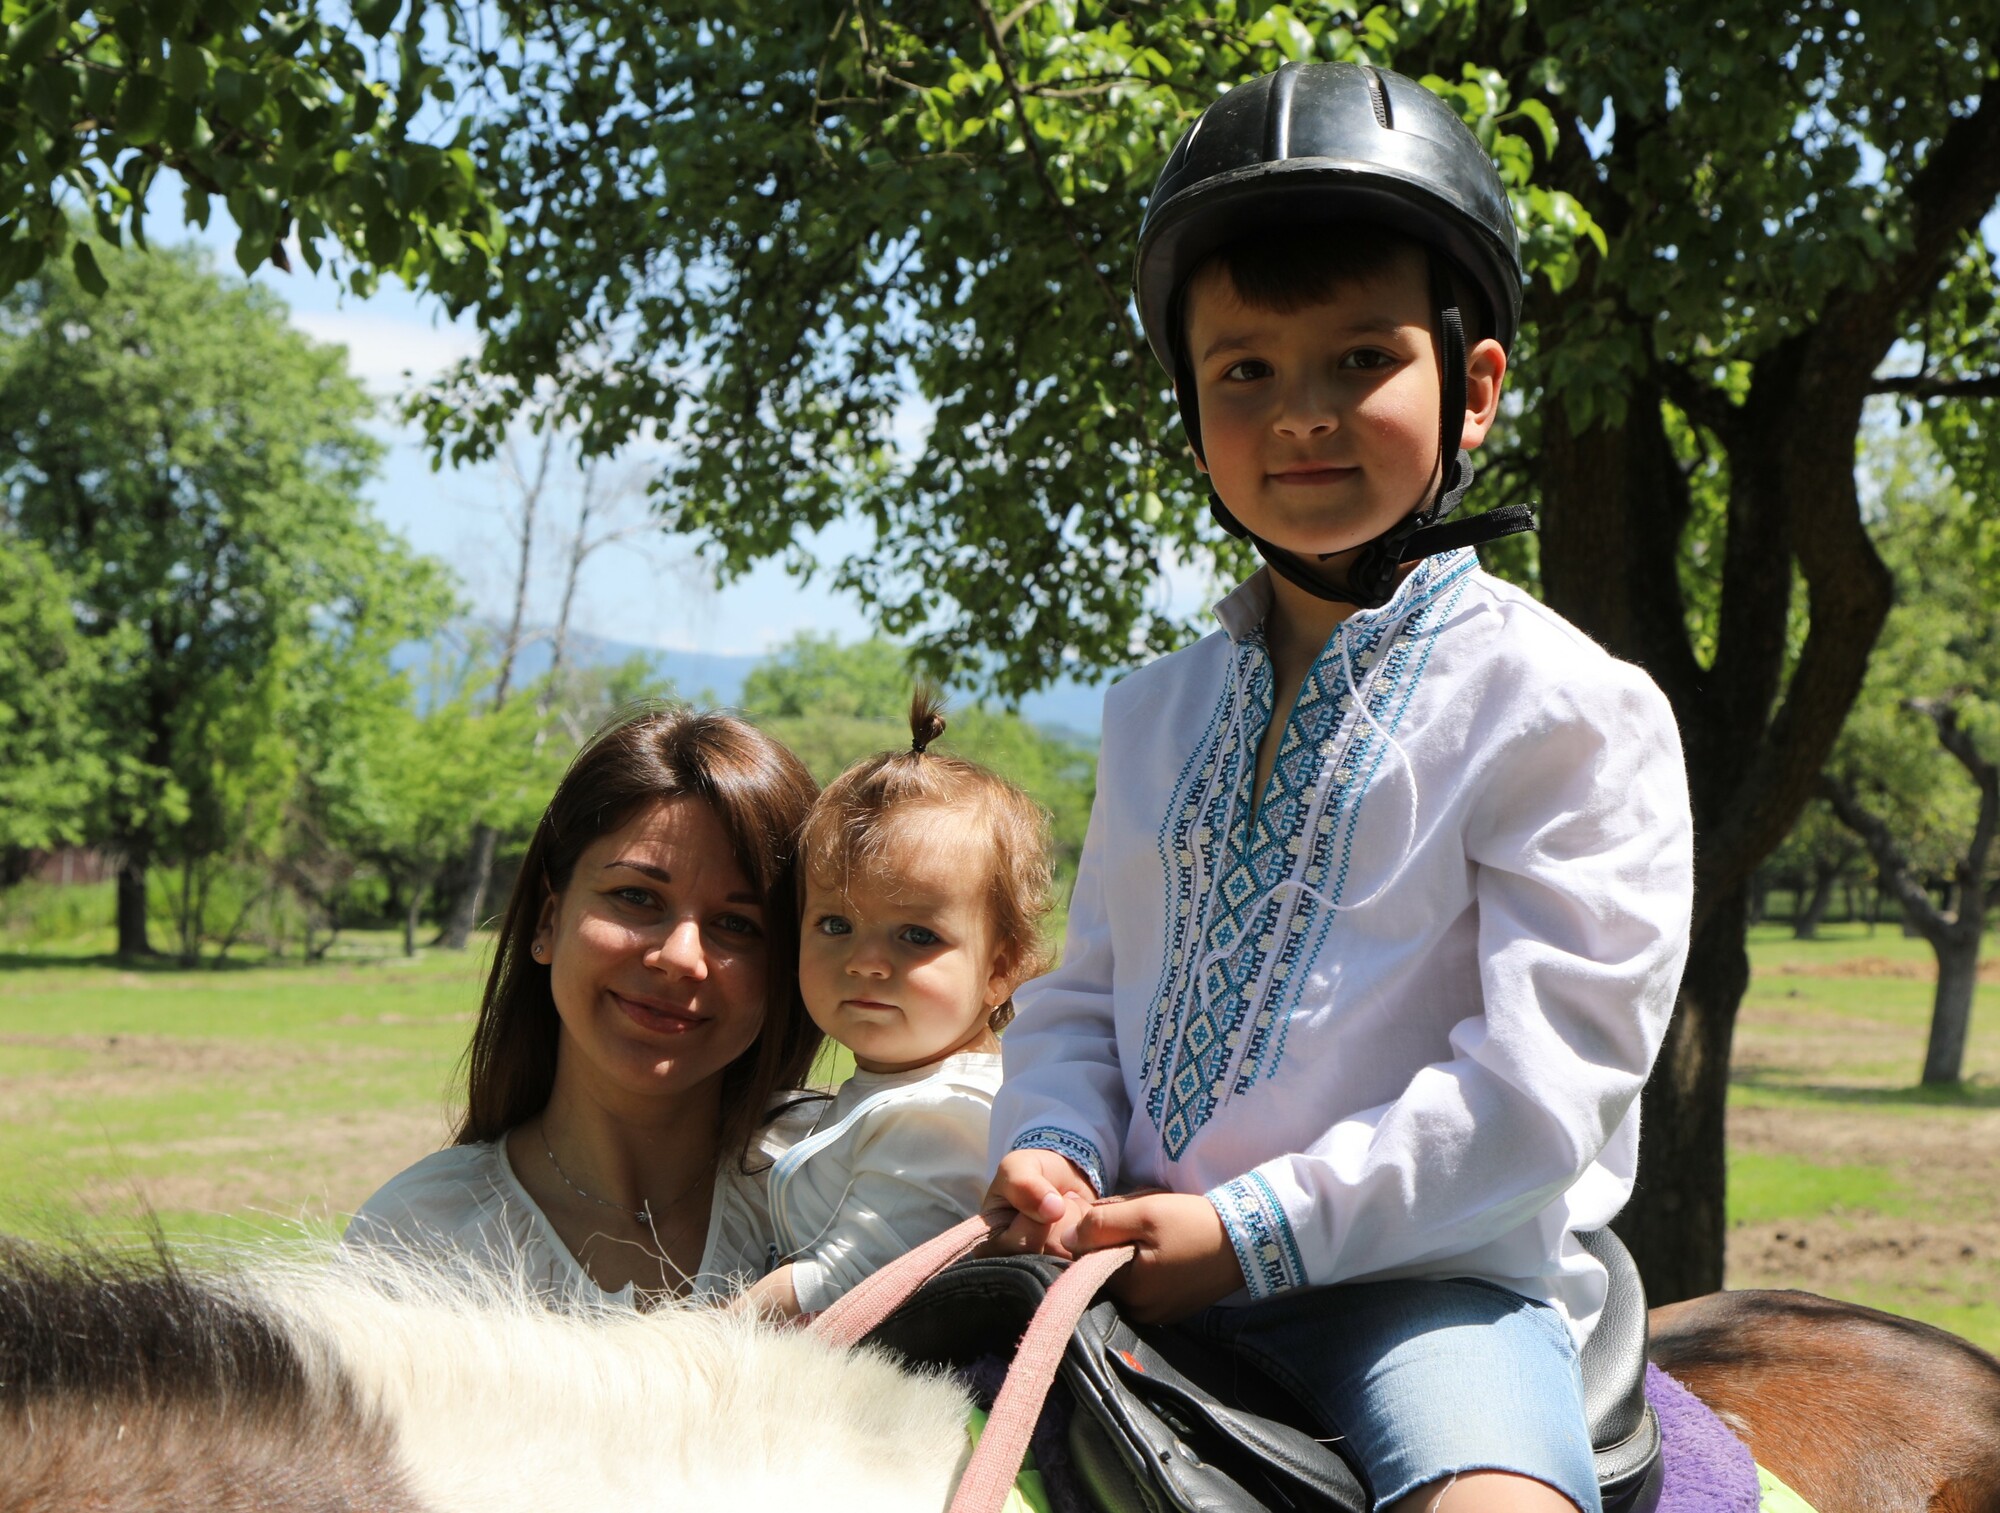 A woman holding a small child standing next to a boy riding a horse